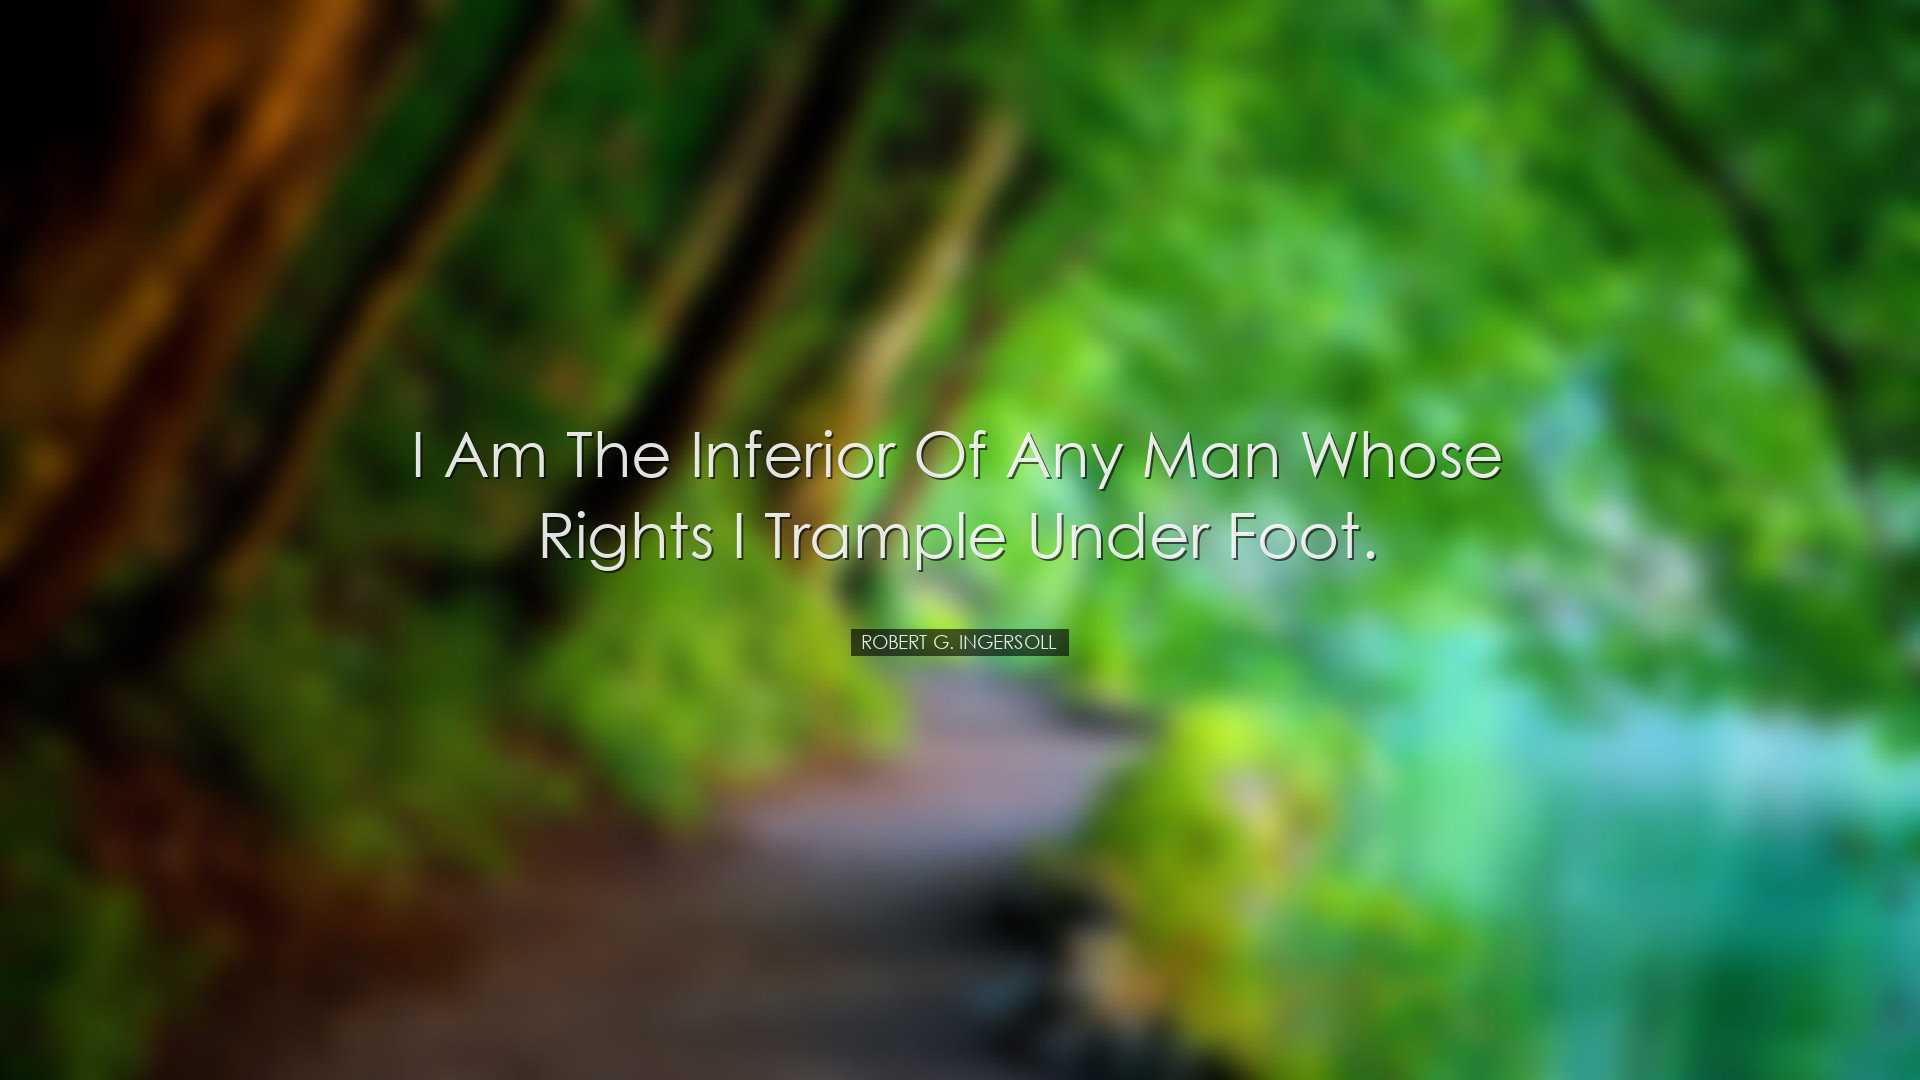 I am the inferior of any man whose rights I trample under foot. -